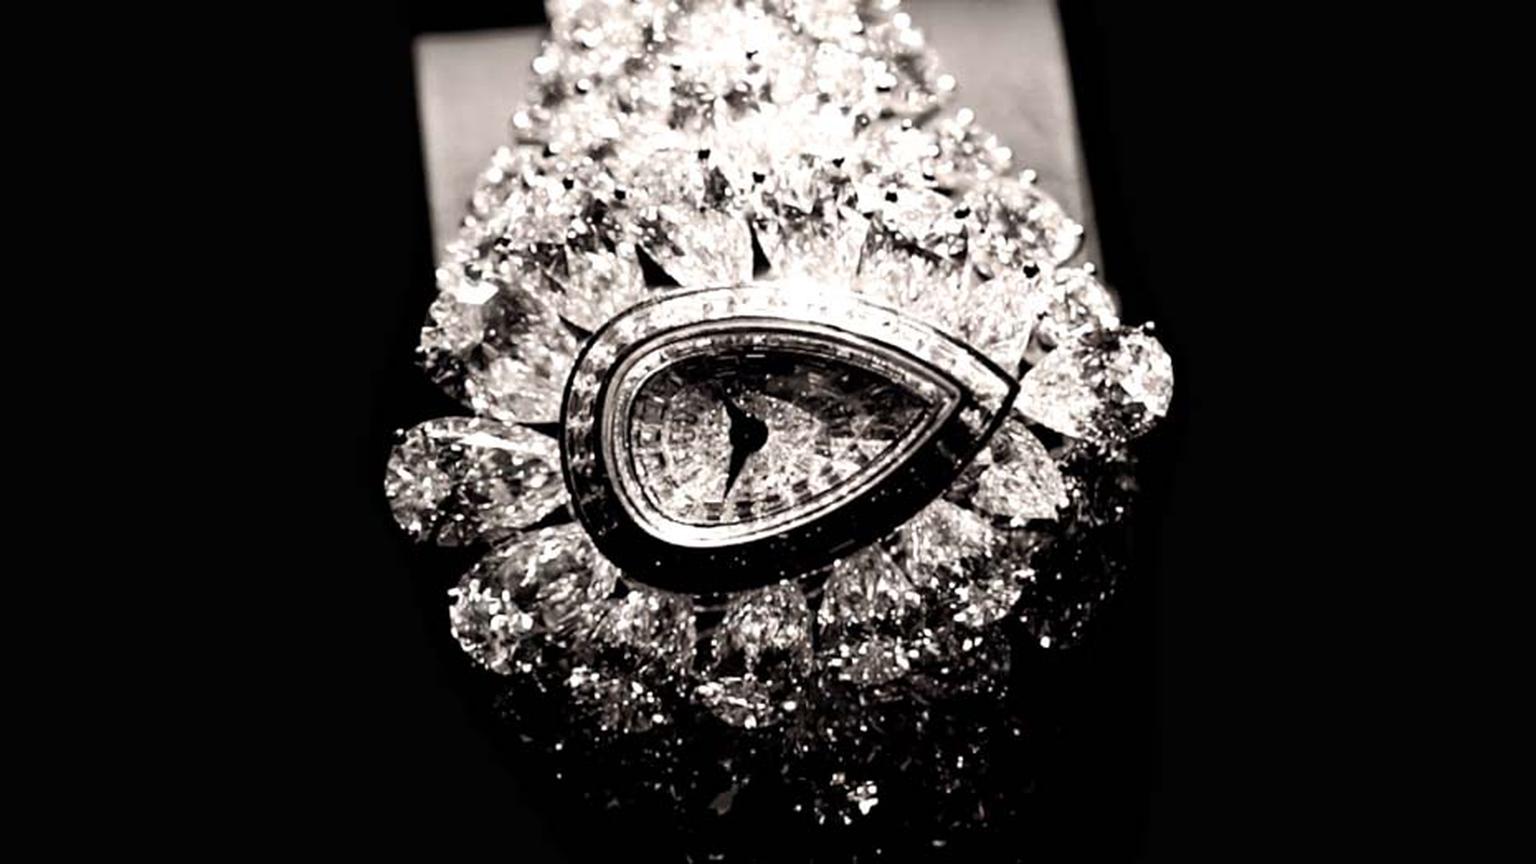 The transformable Graff Fascination watch, with its 152.96ct cluster of white diamonds, includes a rare 38.13 pear-shaped diamond (not shown here), which can be detached and placed in a special shank and worn as a ring. In yet another transformation, a di